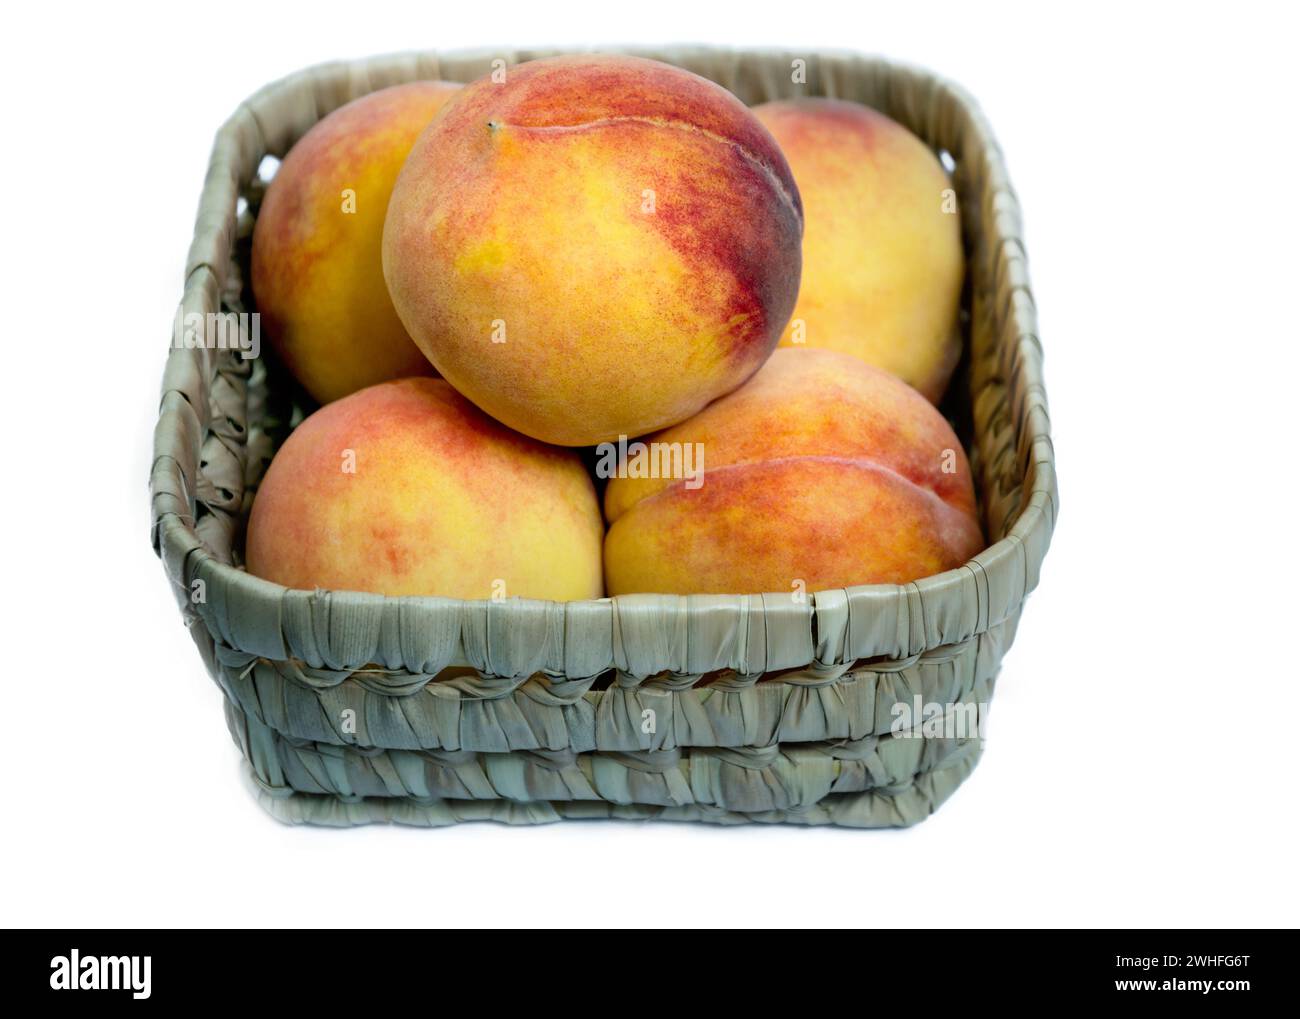 Basket full of fresh from the garden organic yellow peaches on a white background Stock Photo